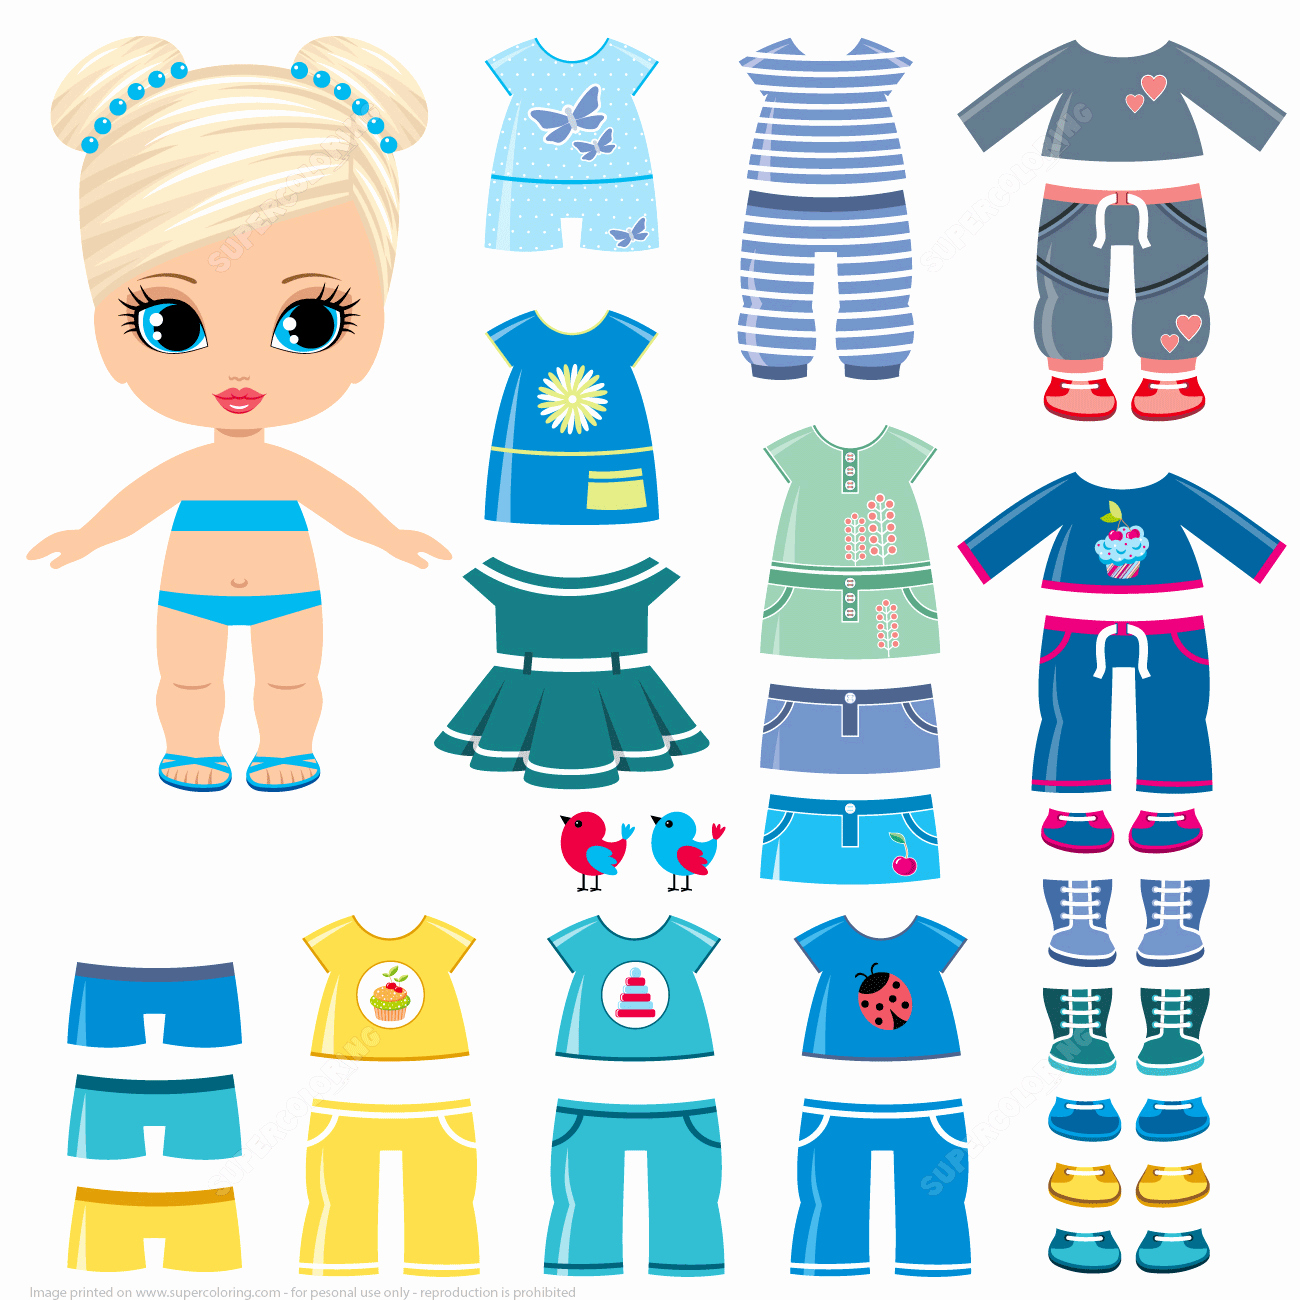 Printable Paper Dolls Templates Unique Summer Clothing and Shoes for A Little Girl Paper Doll